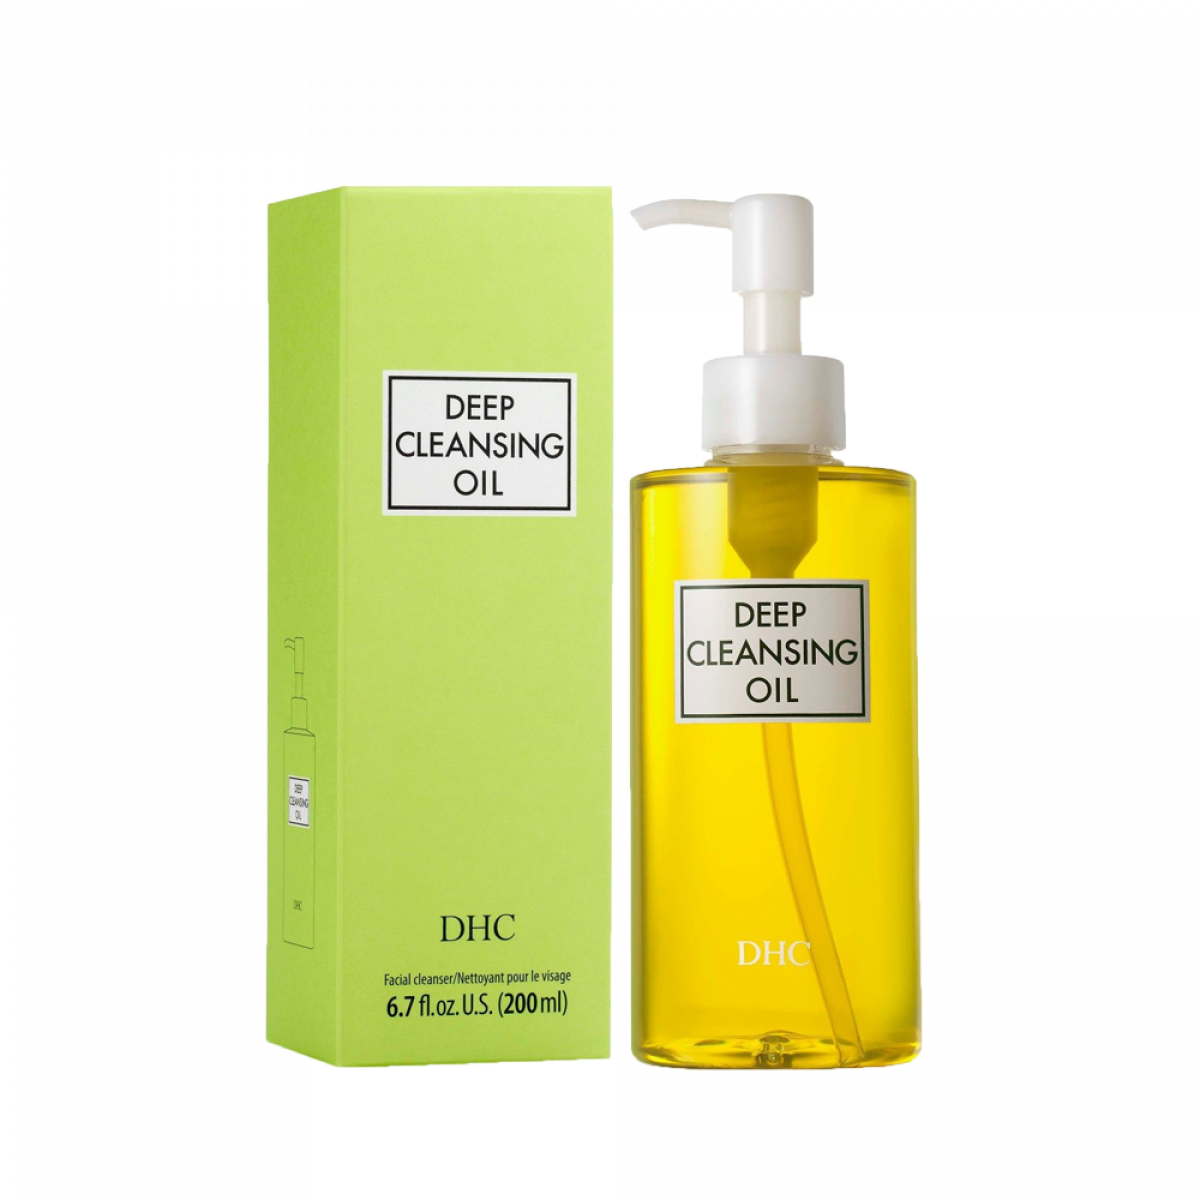 Deep Cleansing Oil - DHC